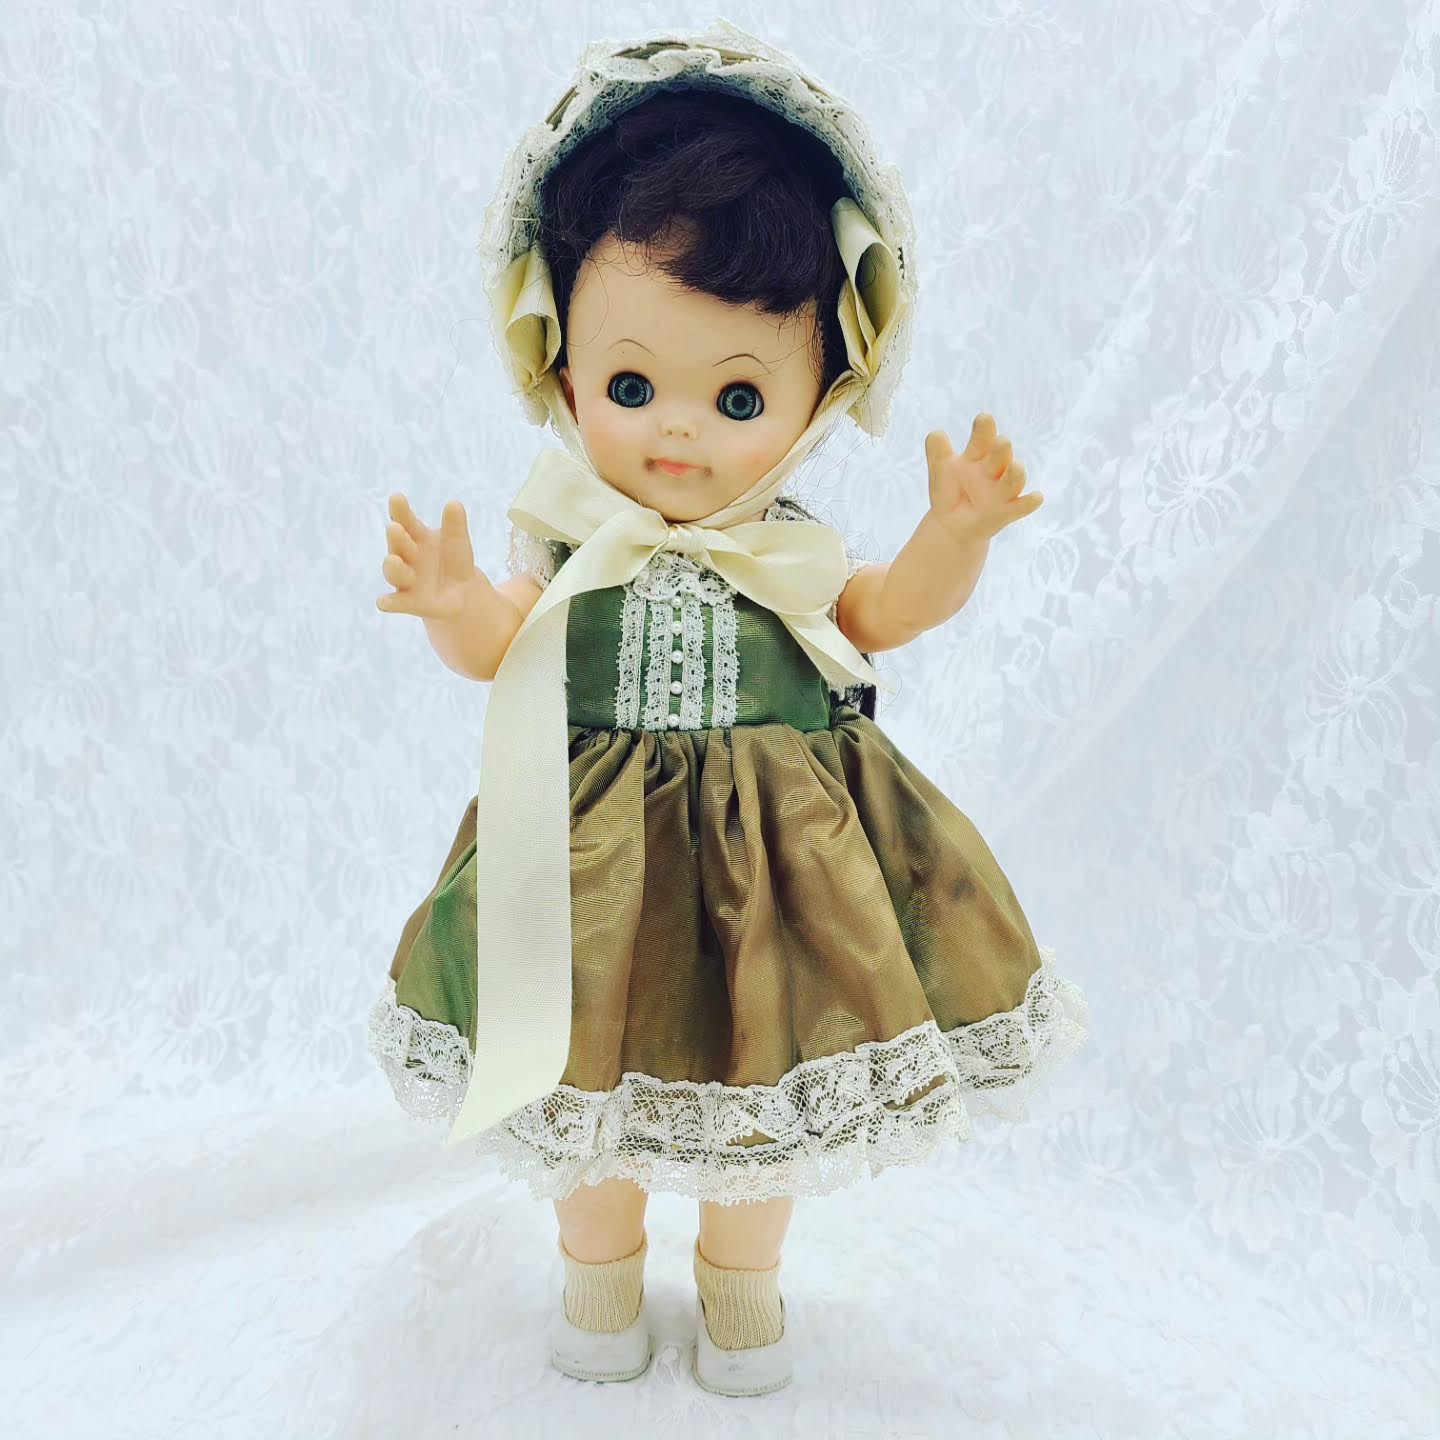 Fannie Haunted Doll ~ 14" Hard Plastic All ORIGINAL 1950s Fashion Doll ~ Paranormal ~ Older than She Looks ~ Sassy ~ Drunk ~ Loves Alcohol Offerings